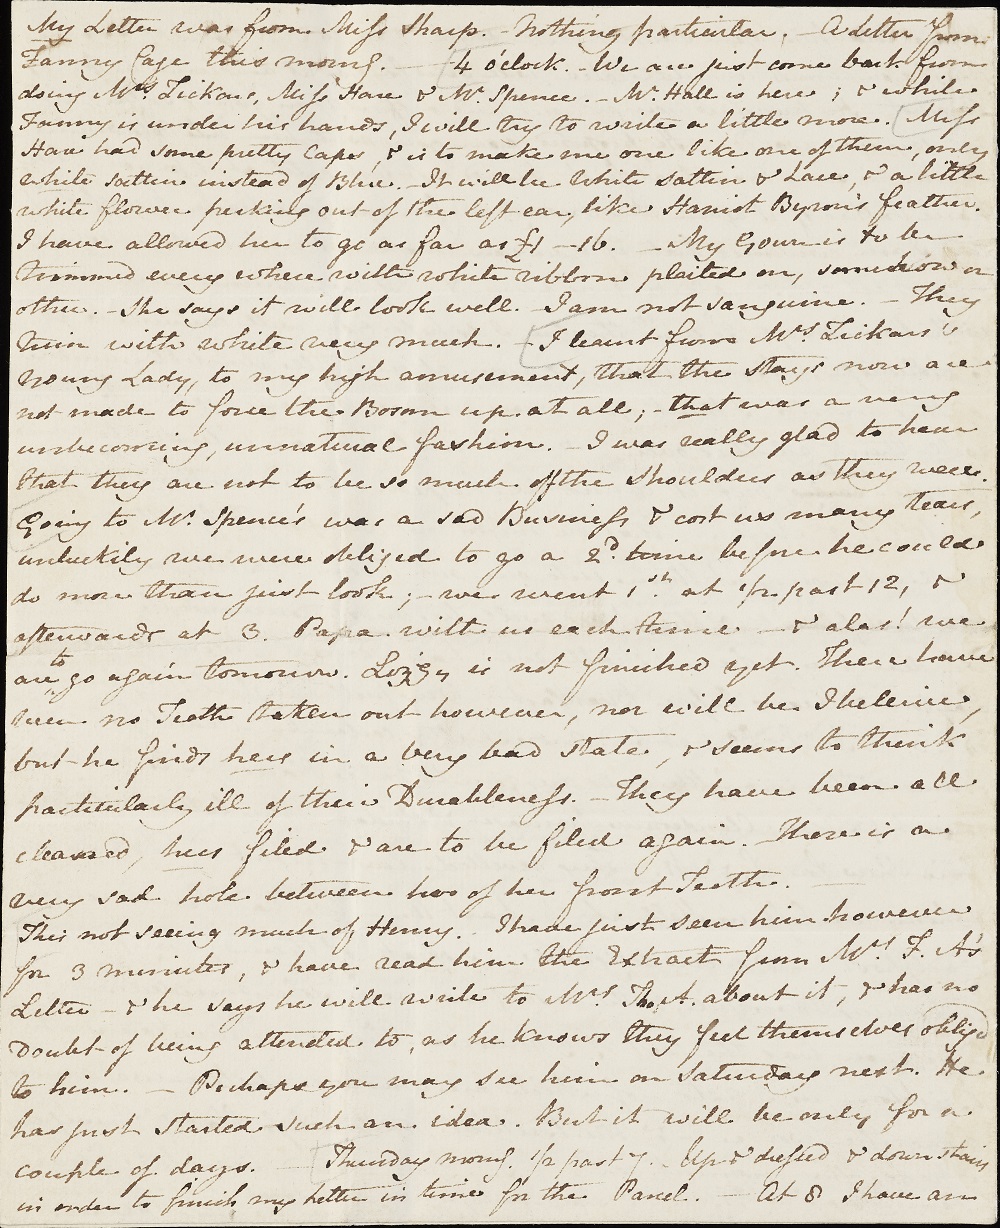 Page 4 of a letter from Jane Austen to Cassandra Austen 15th-16th September 1813